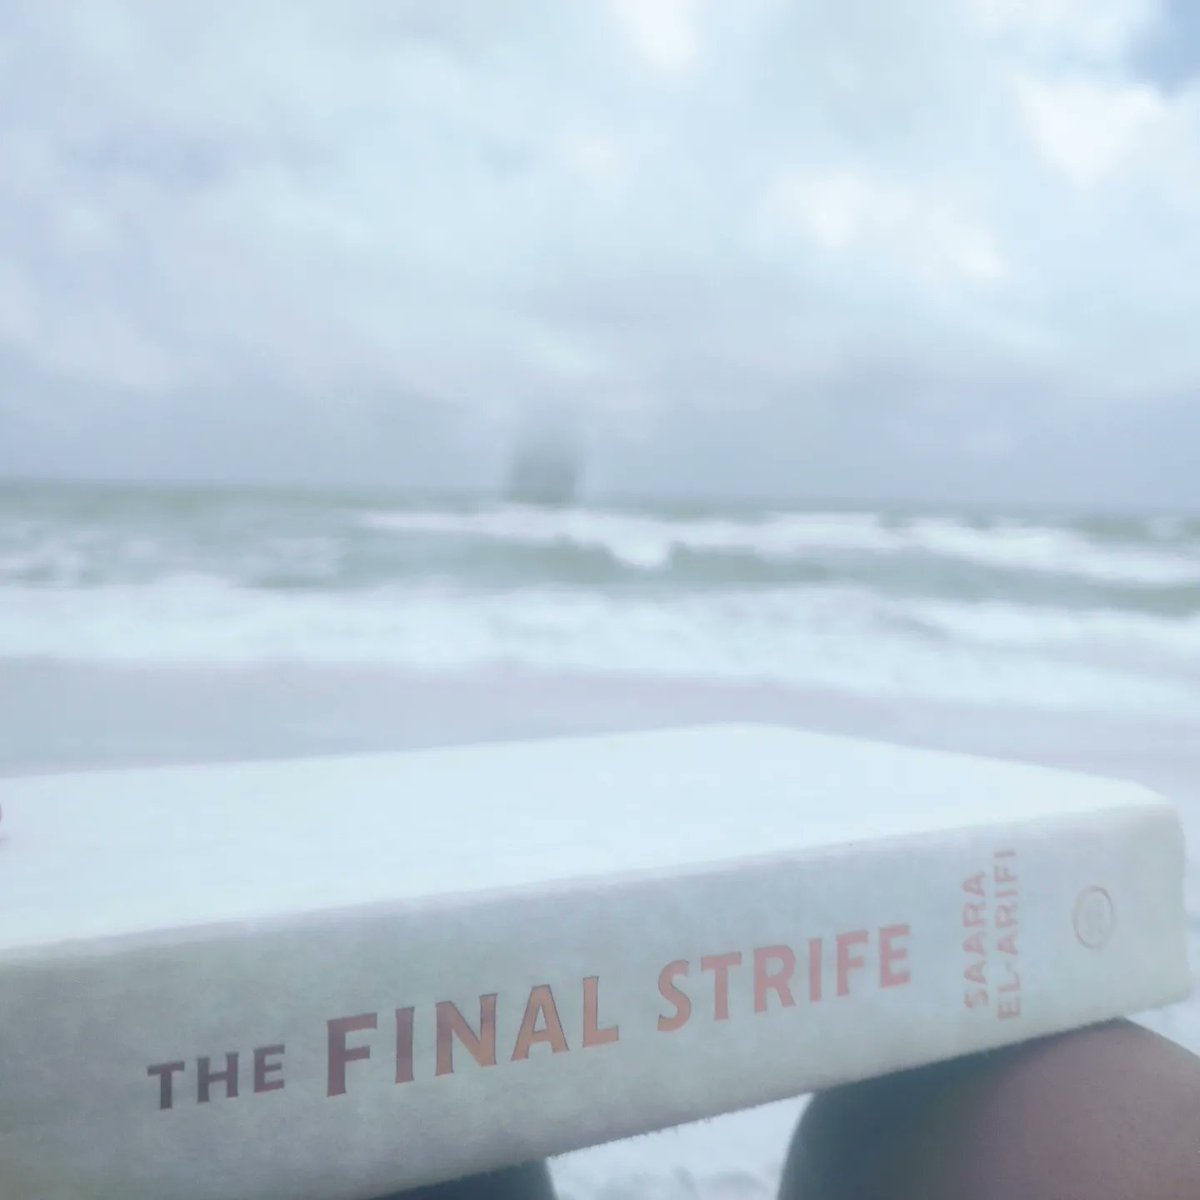 Currently reading:
#TheFinalStrife #TheFirstBrightThing and #andshallmachinessurrender